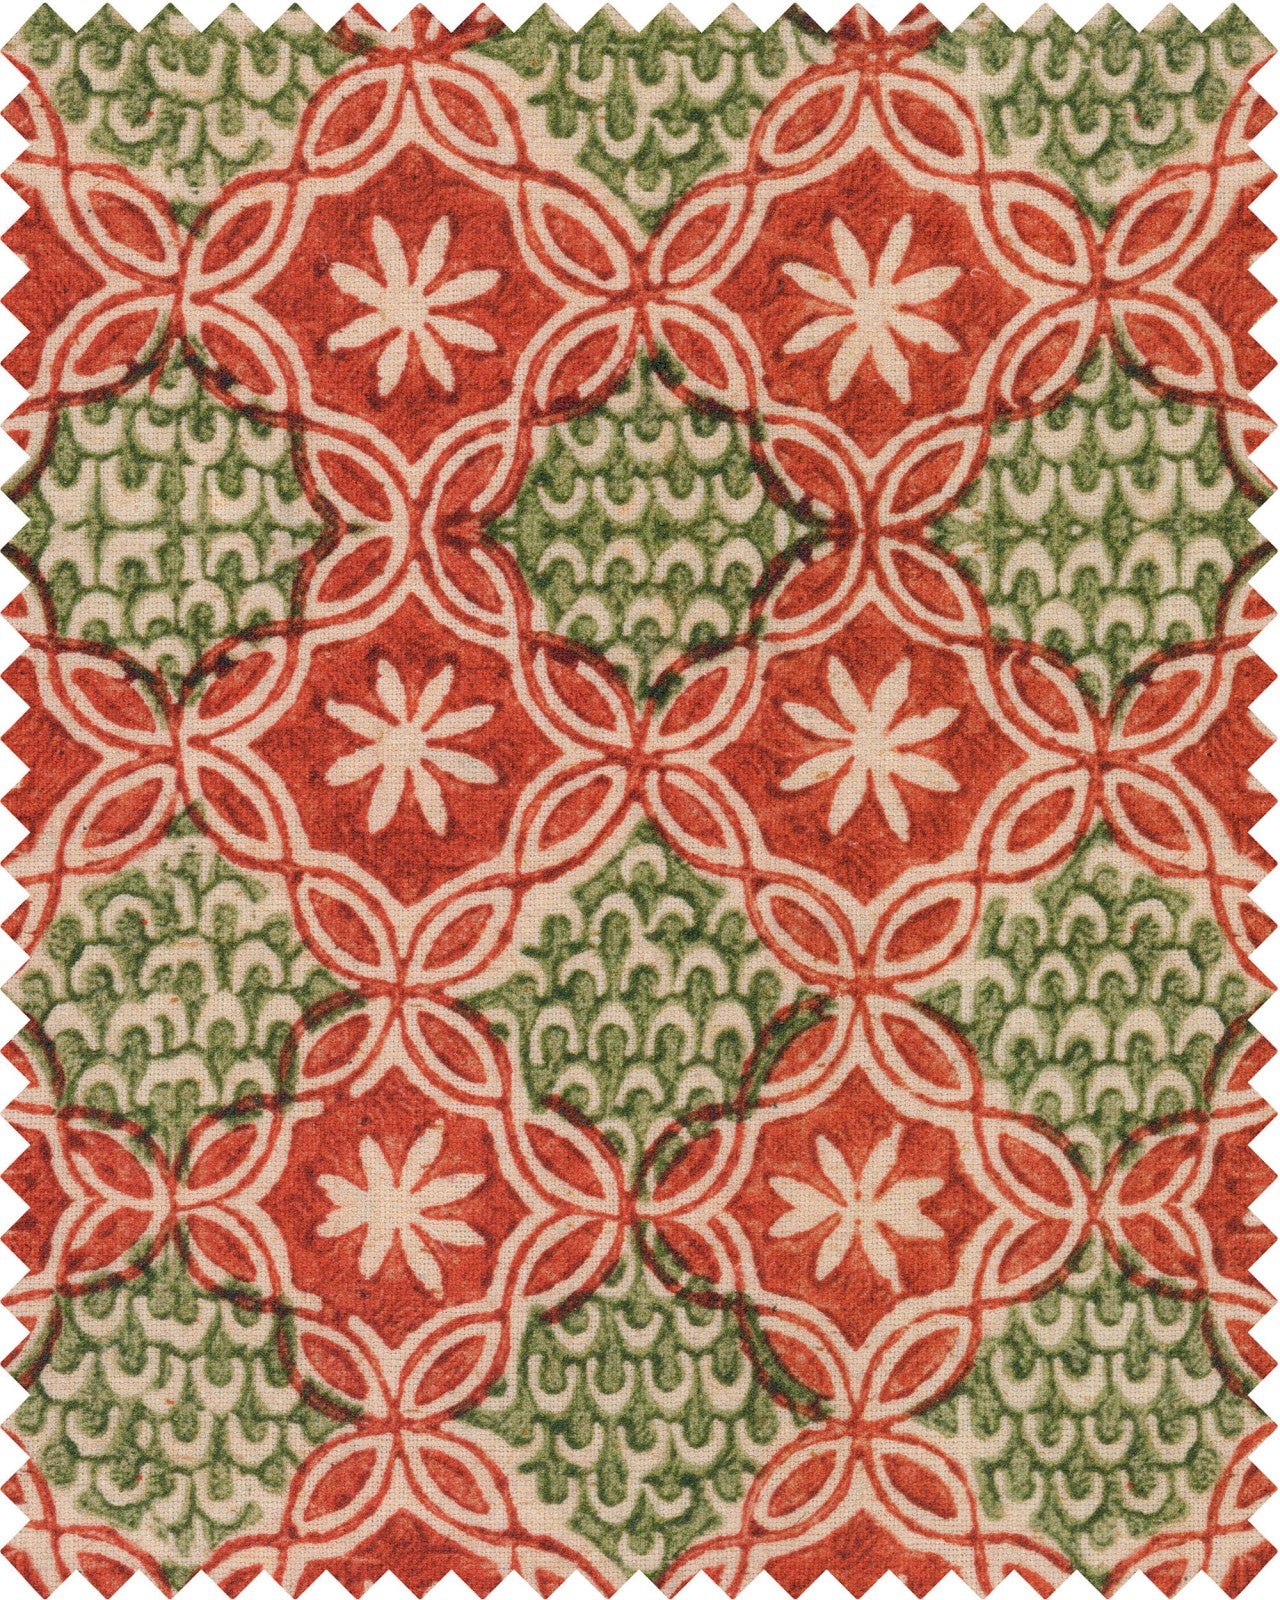 Rasiya fabric in red green taupe color - pattern number FB00074 - by Mind The Gap in the Woodstock collection